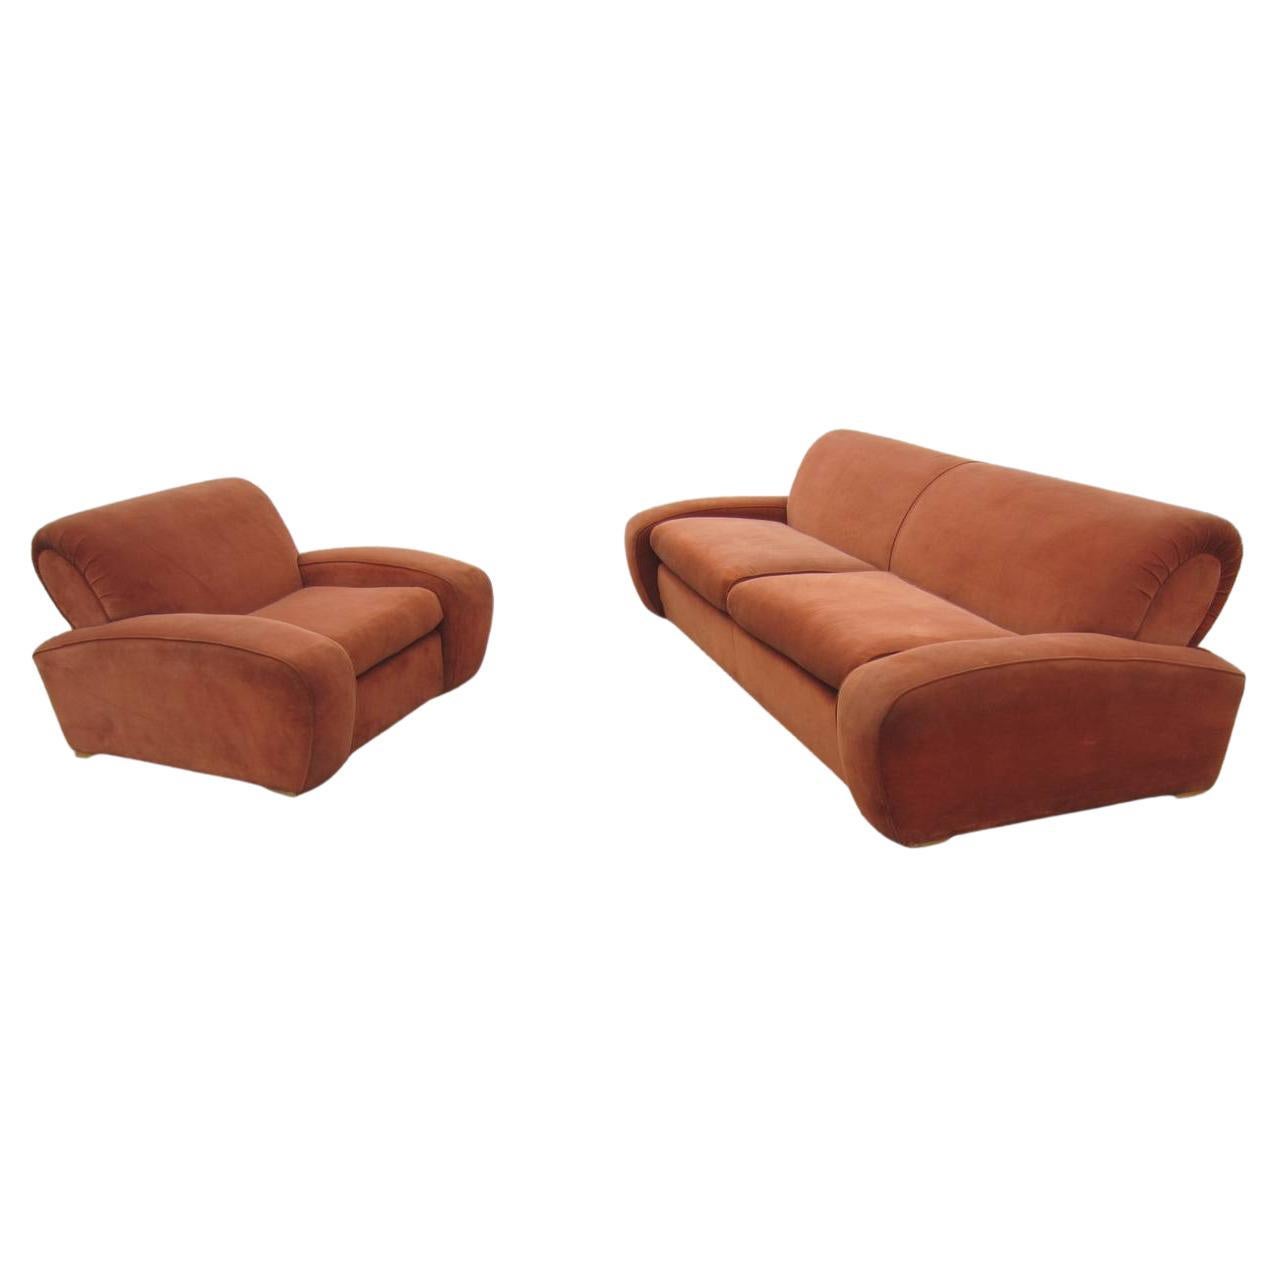 Art Deco Paul Frankl Lounge Chair and Sofa Set